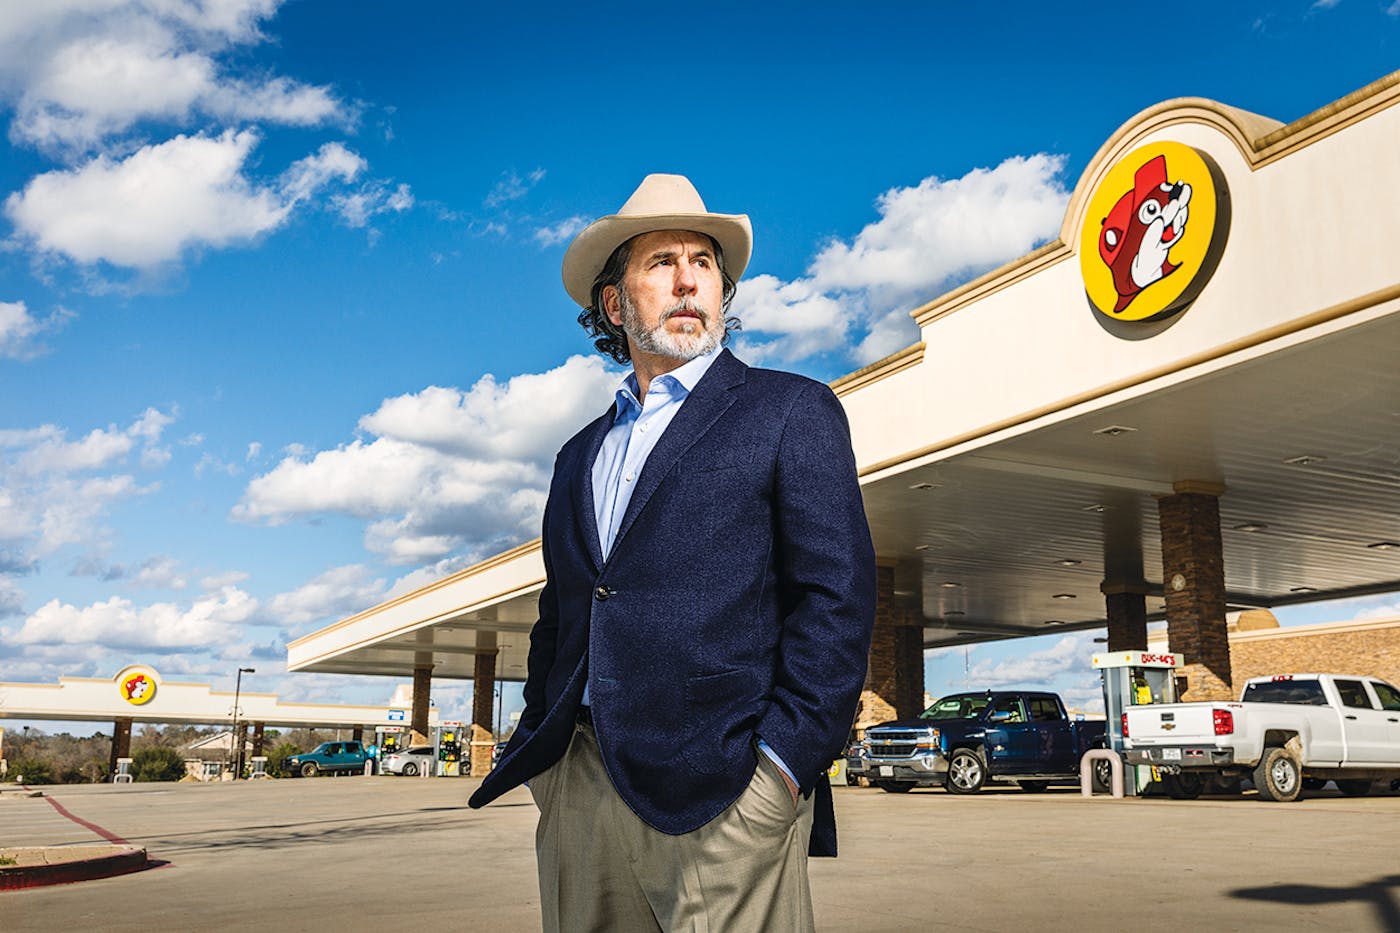 https://img.texasmonthly.com/2019/02/bucees-march-feature.jpg?auto=compress&crop=faces&fit=crop&fm=jpg&h=1050&ixlib=php-3.3.1&q=45&w=1400